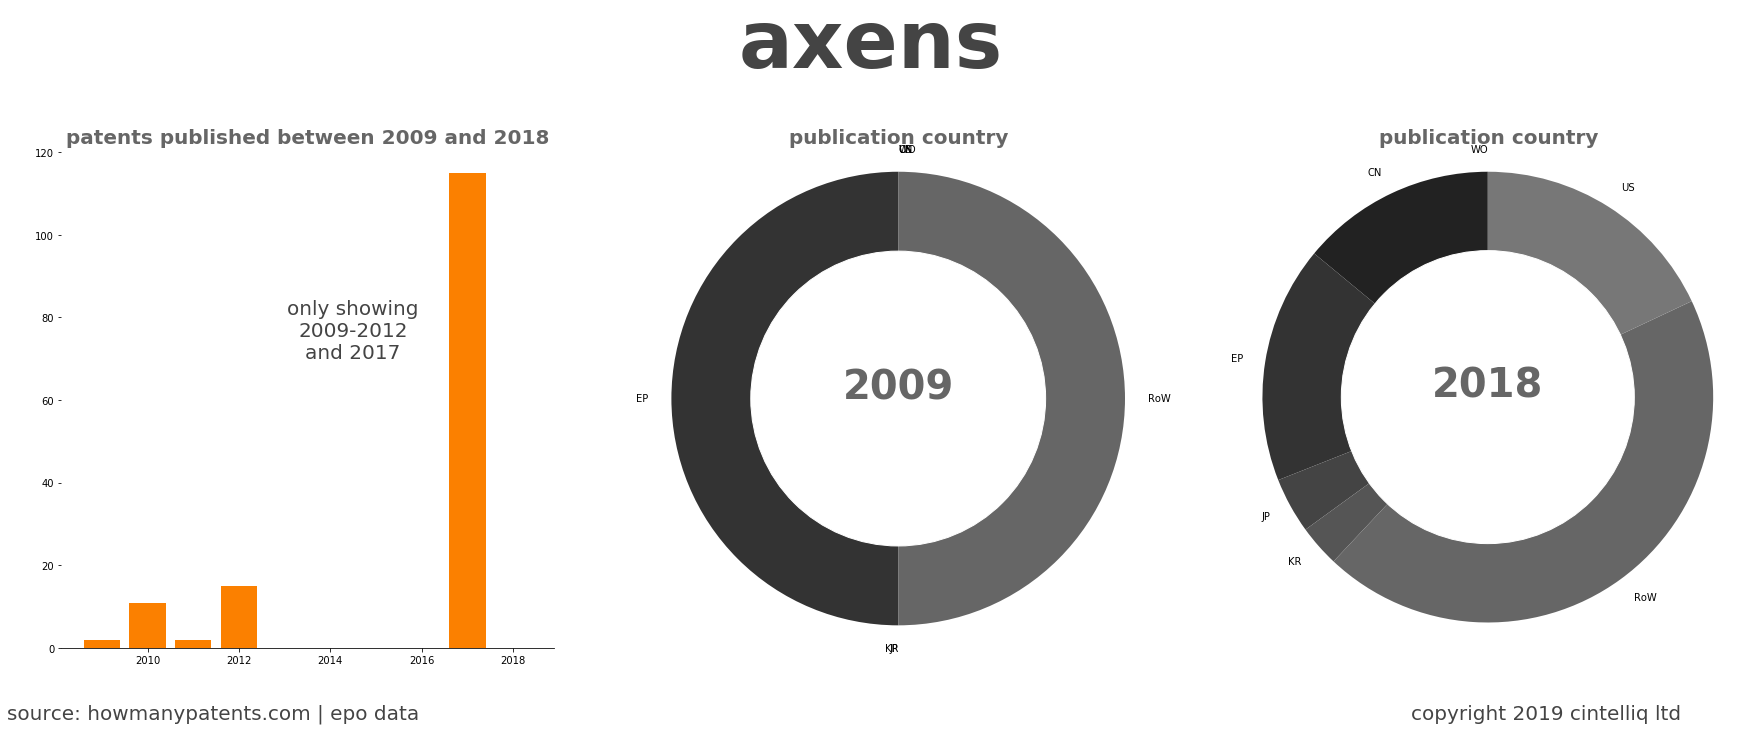 summary of patents for Axens